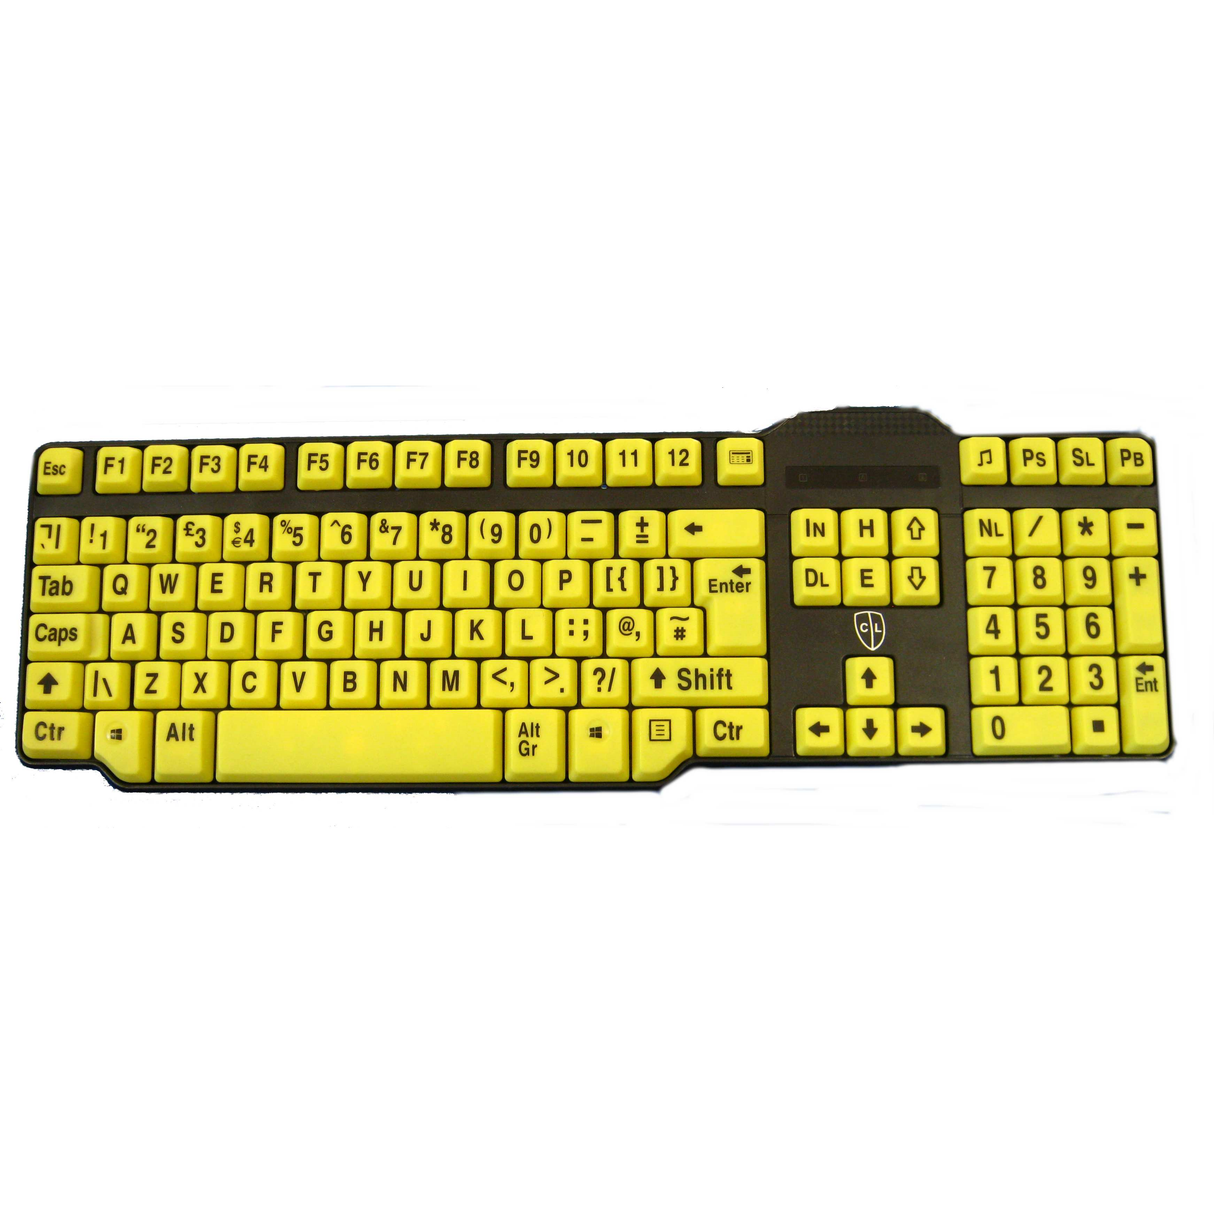 Easy2Use USB Keyboard with Braided Cable - Large Black Font on Yellow Keys